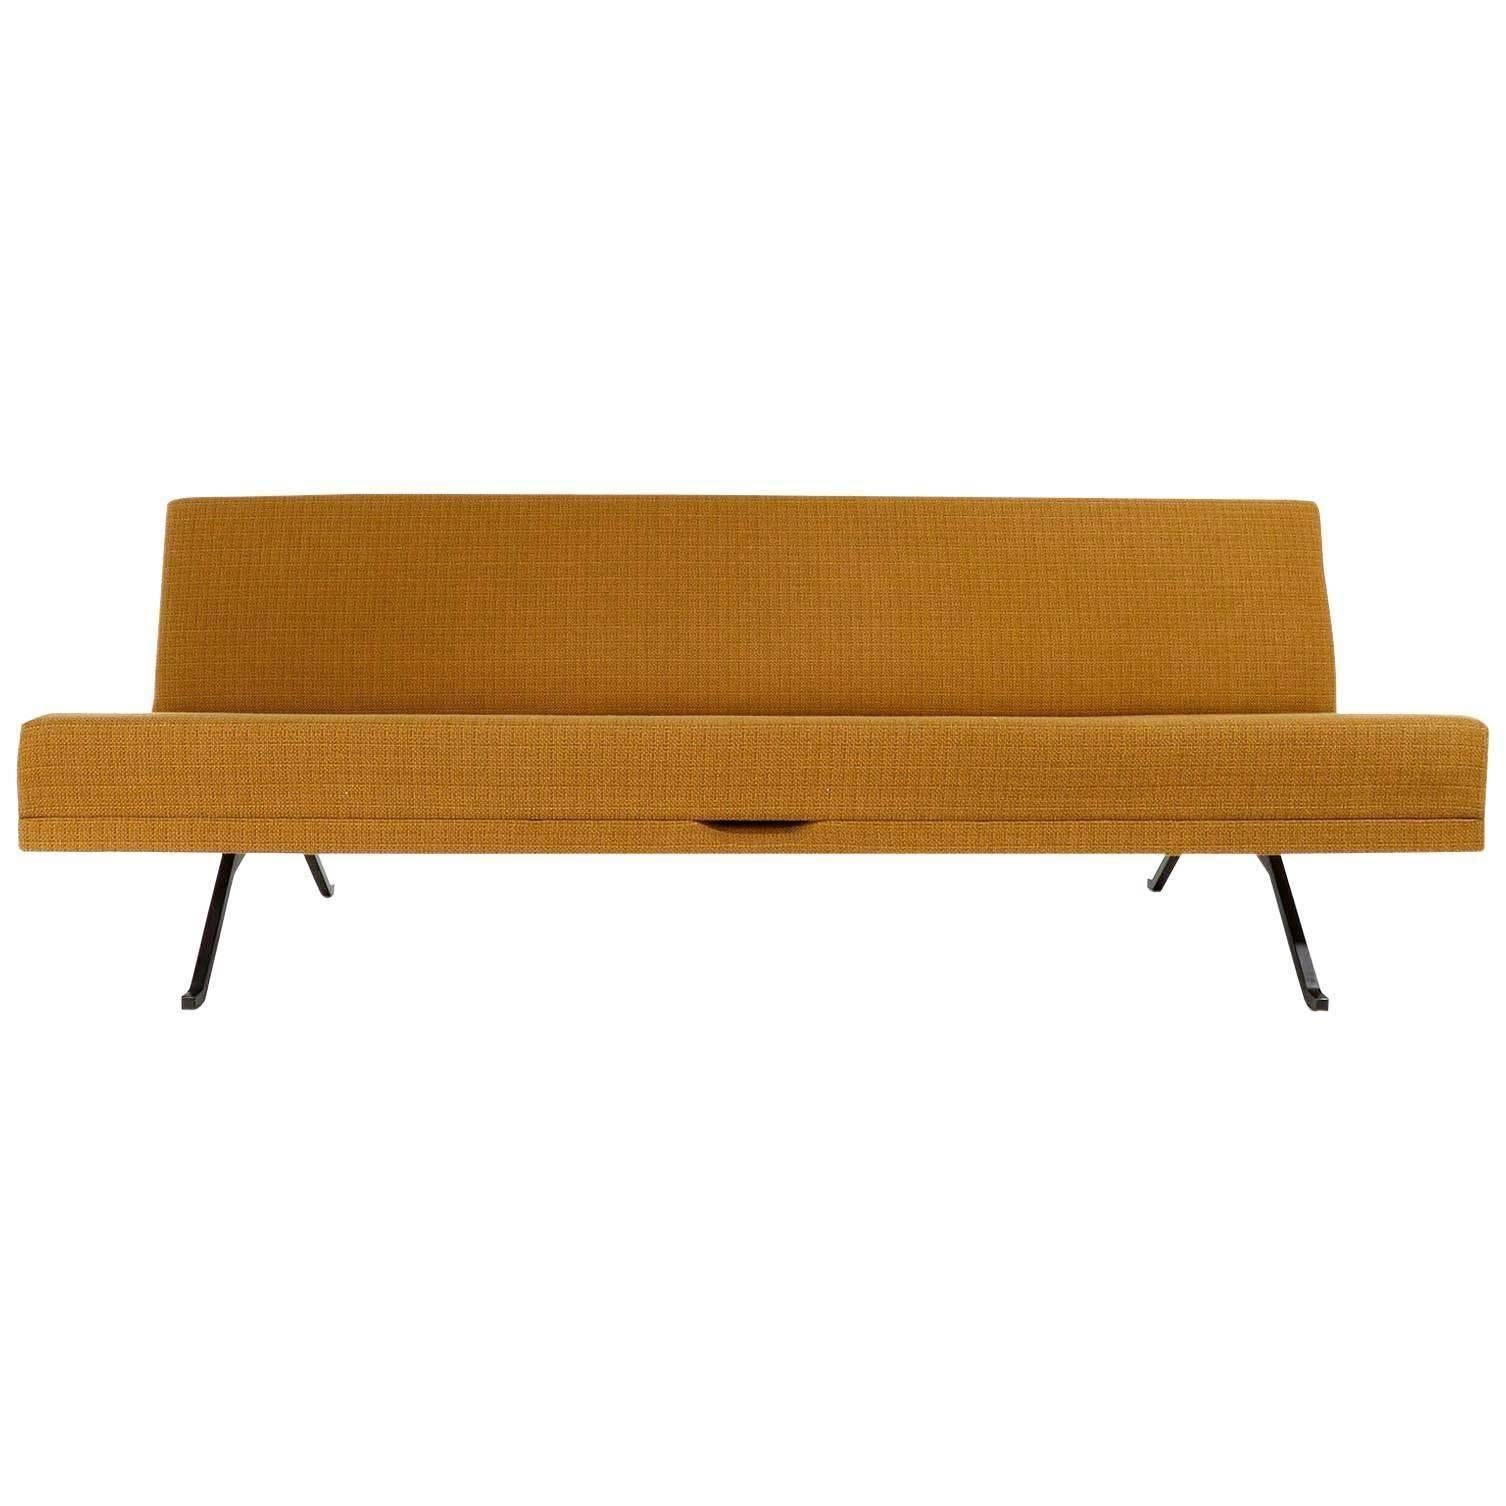 A freestanding sofa model 'Constanze' / 'Constance' with black steel and a fabric in a warm cognac / golden / ocher / mustard yellow / orange tone designed by Prof. Johannes Spalt for Wittmann, Austria, manufactured in midcentury, circa 1970.
By one